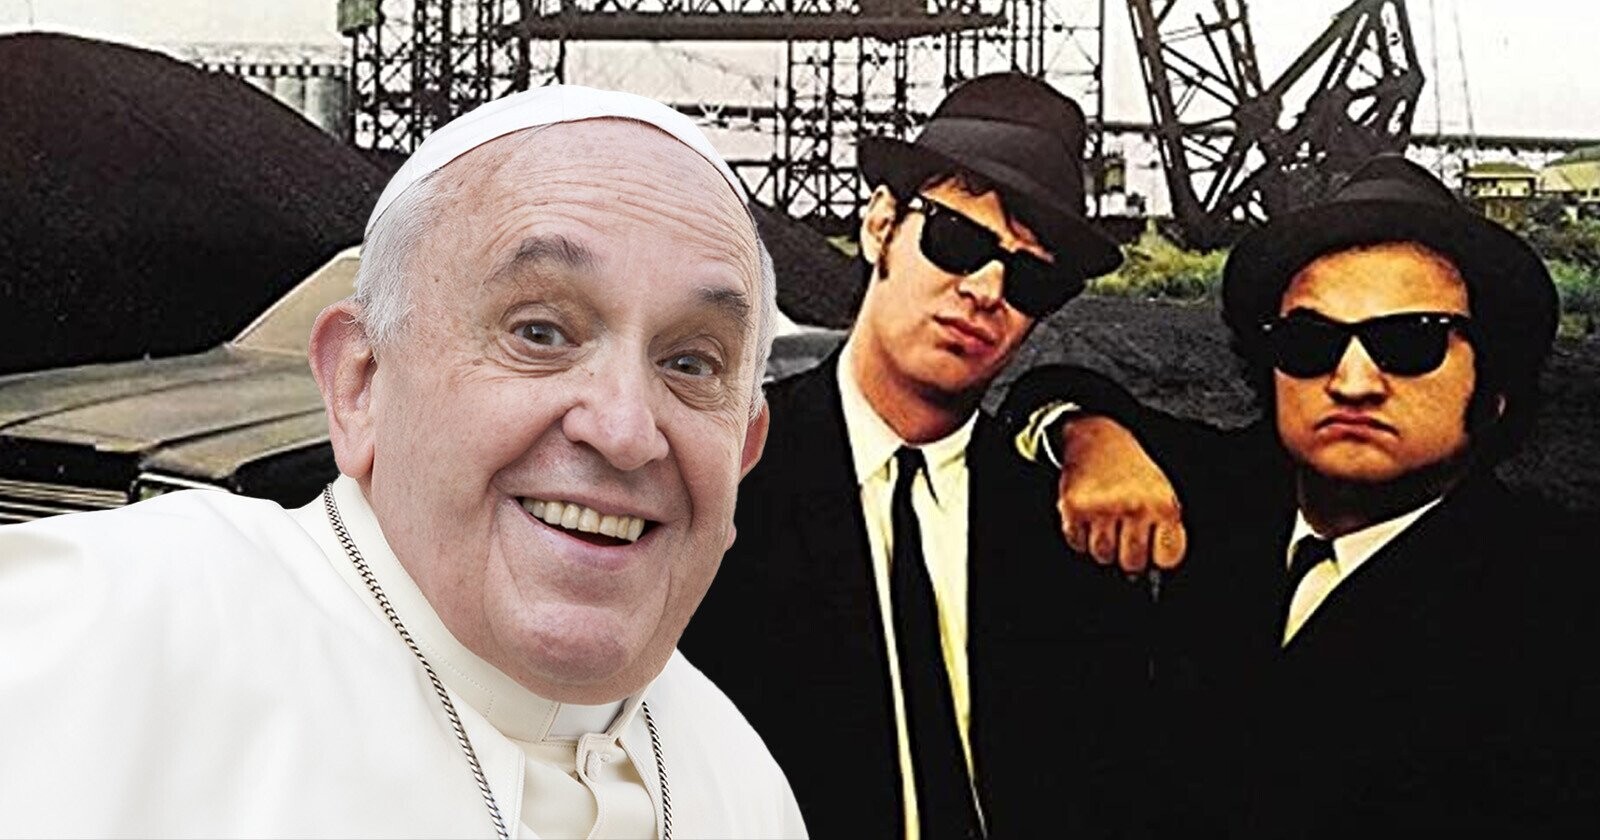 The Blues Brothers' Is An Official 'Catholic Classic' According to